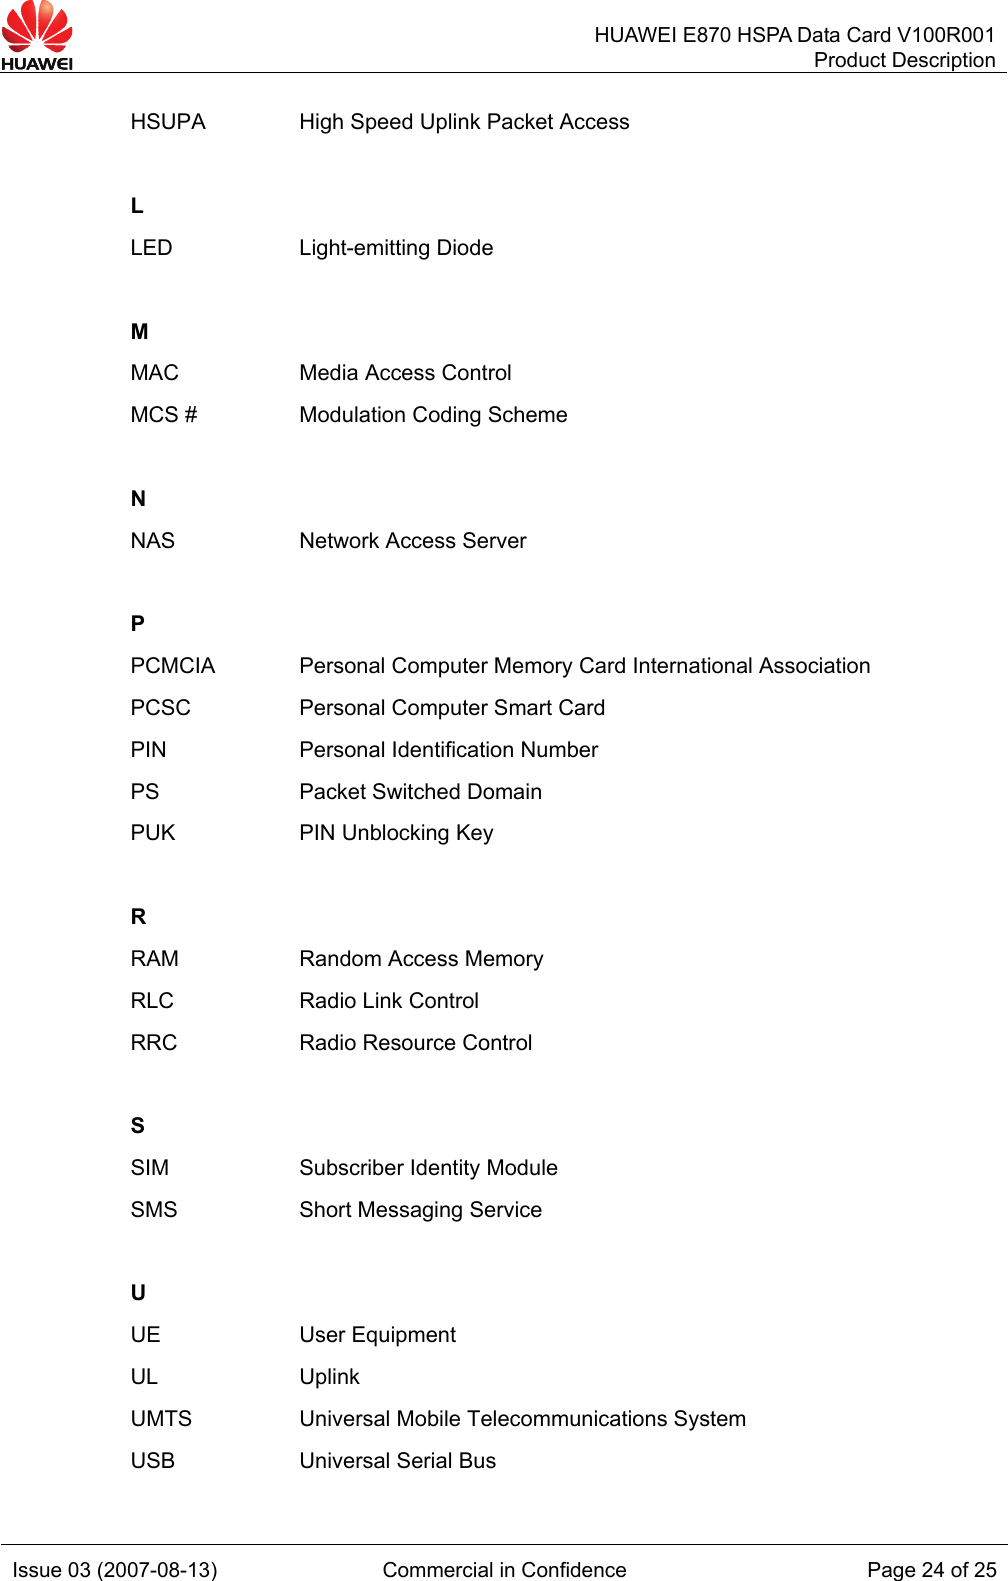   HUAWEI E870 HSPA Data Card V100R001Product Description Issue 03 (2007-08-13)  Commercial in Confidence  Page 24 of 25 HSUPA  High Speed Uplink Packet Access   L  LED Light-emitting Diode   M   MAC  Media Access Control MCS #  Modulation Coding Scheme   N   NAS  Network Access Server   P   PCMCIA  Personal Computer Memory Card International Association PCSC  Personal Computer Smart Card PIN  Personal Identification Number PS Packet Switched Domain PUK  PIN Unblocking Key   R  RAM  Random Access Memory RLC  Radio Link Control RRC Radio Resource Control   S   SIM  Subscriber Identity Module SMS  Short Messaging Service   U   UE User Equipment UL Uplink UMTS  Universal Mobile Telecommunications System USB  Universal Serial Bus 